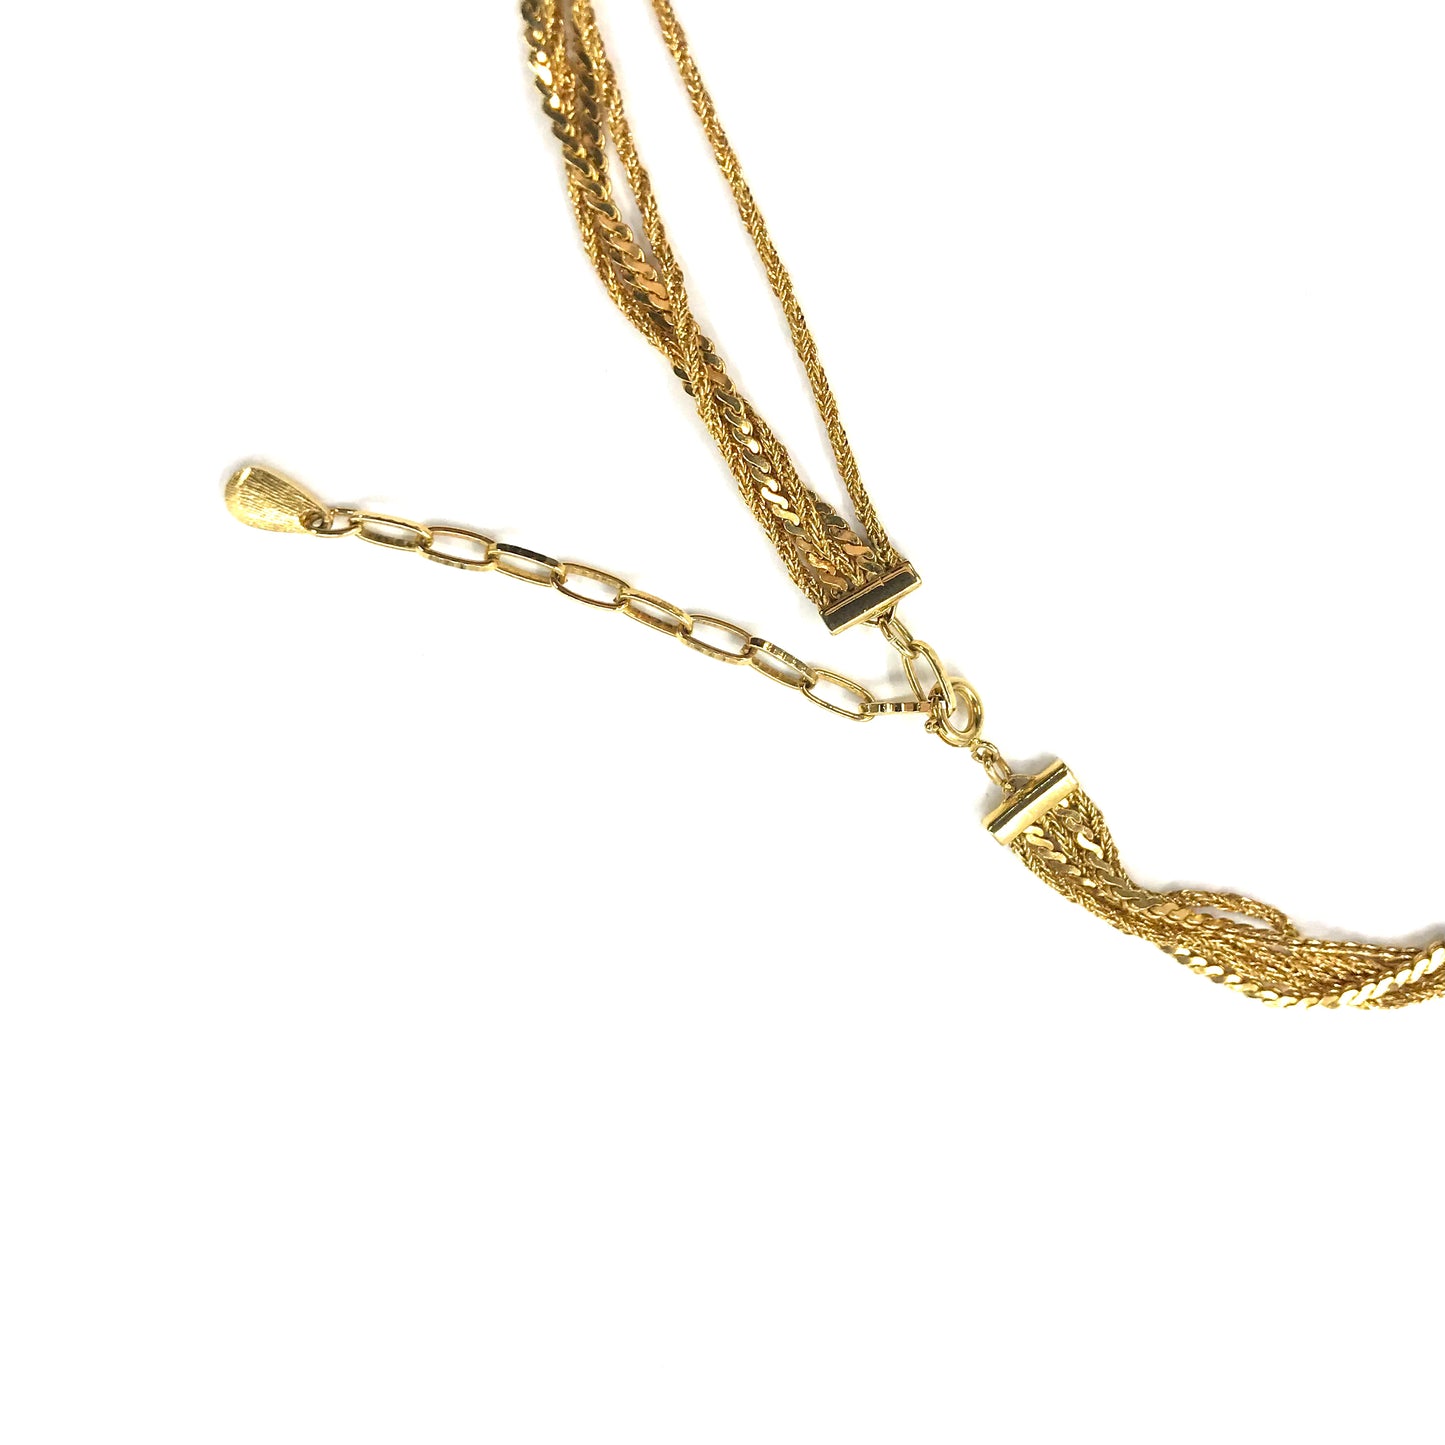 VINTAGE Gold Chain Necklaces 5連 ゴールドチェーンネックレス 73cm 喜平 ロープチェーン